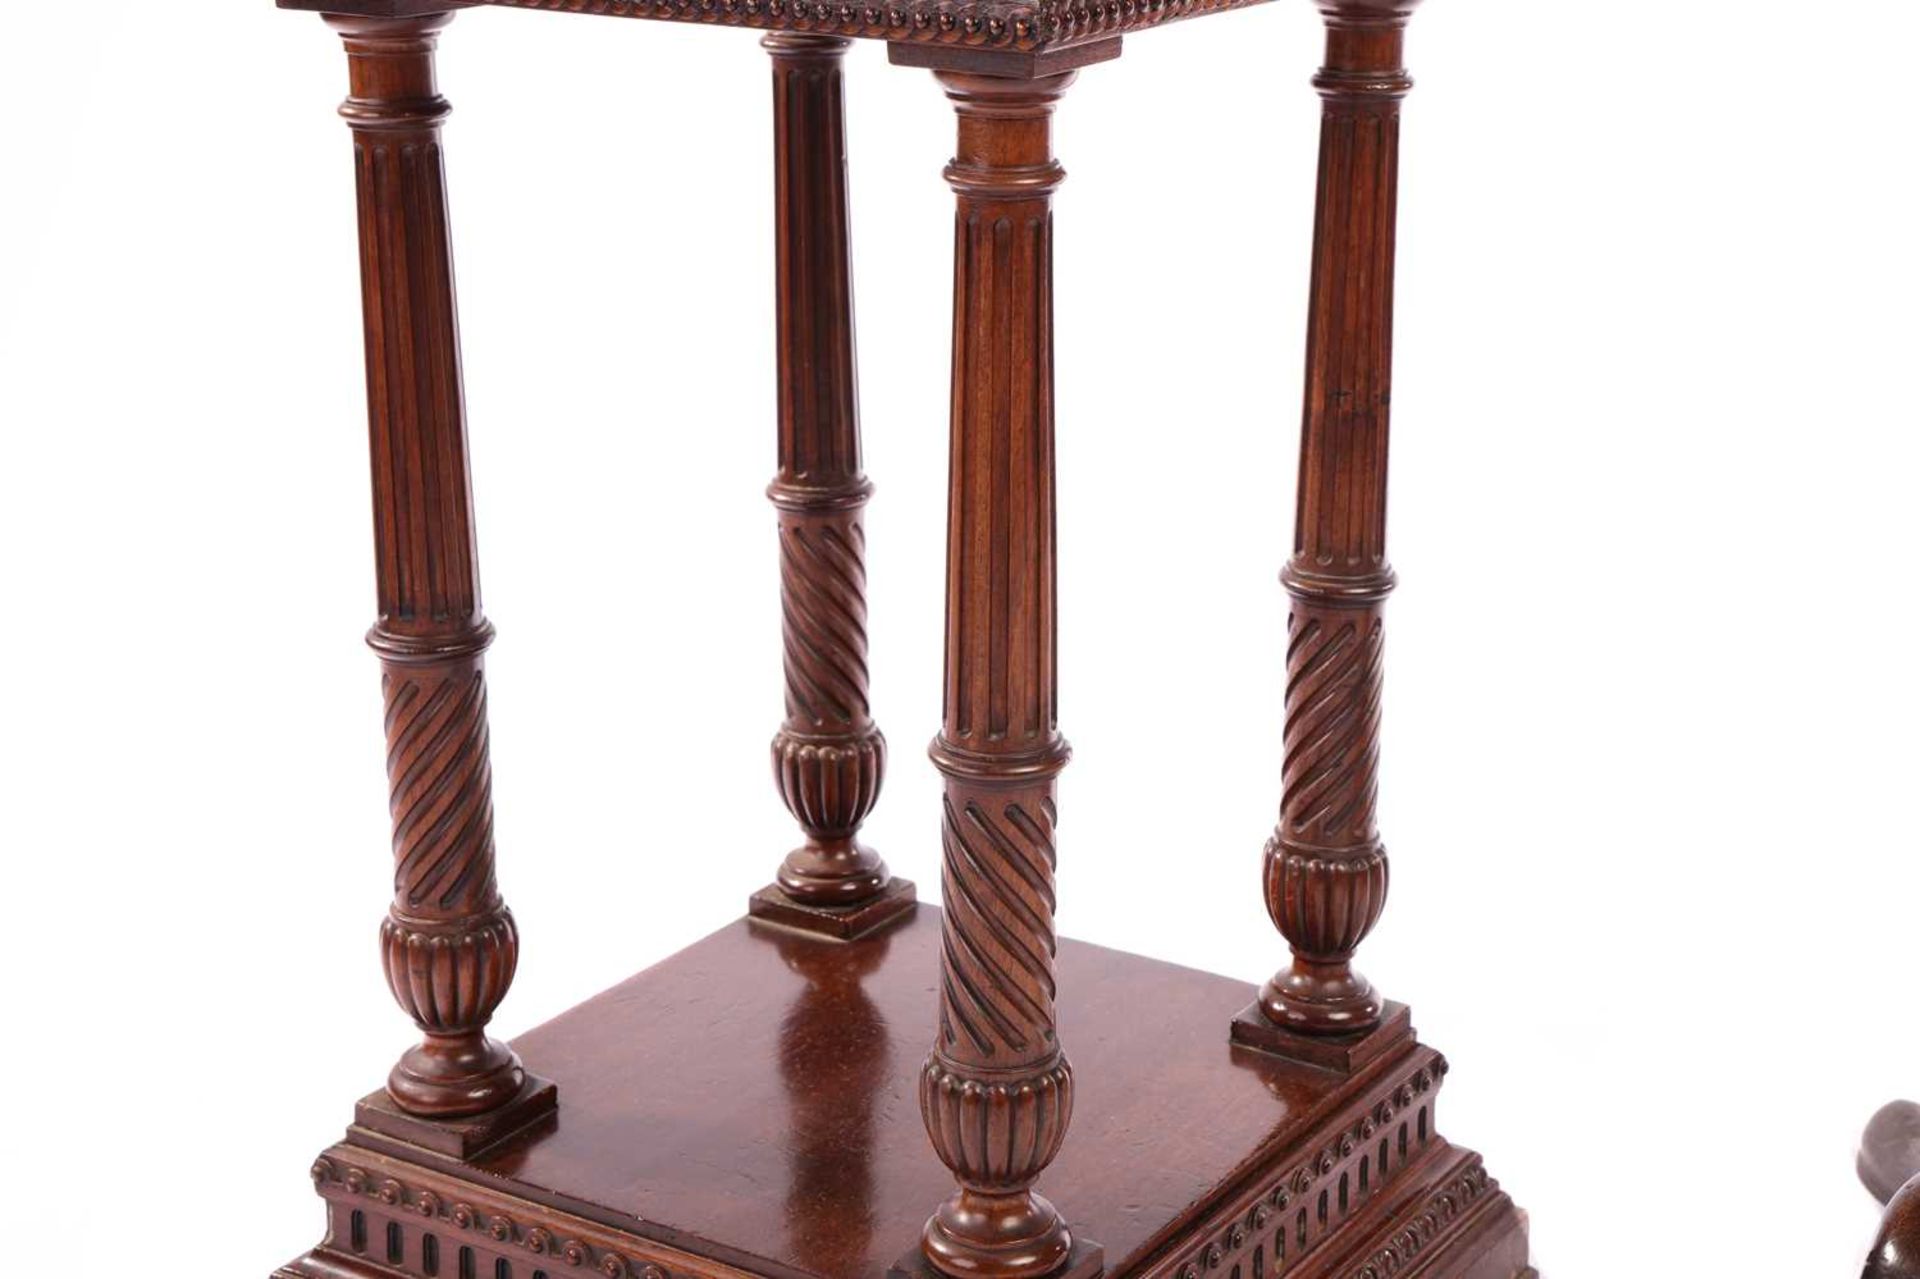 An Edwardian mahogany two-tier pedestal of architectural, form with dentil moulding and fluted colum - Bild 4 aus 6